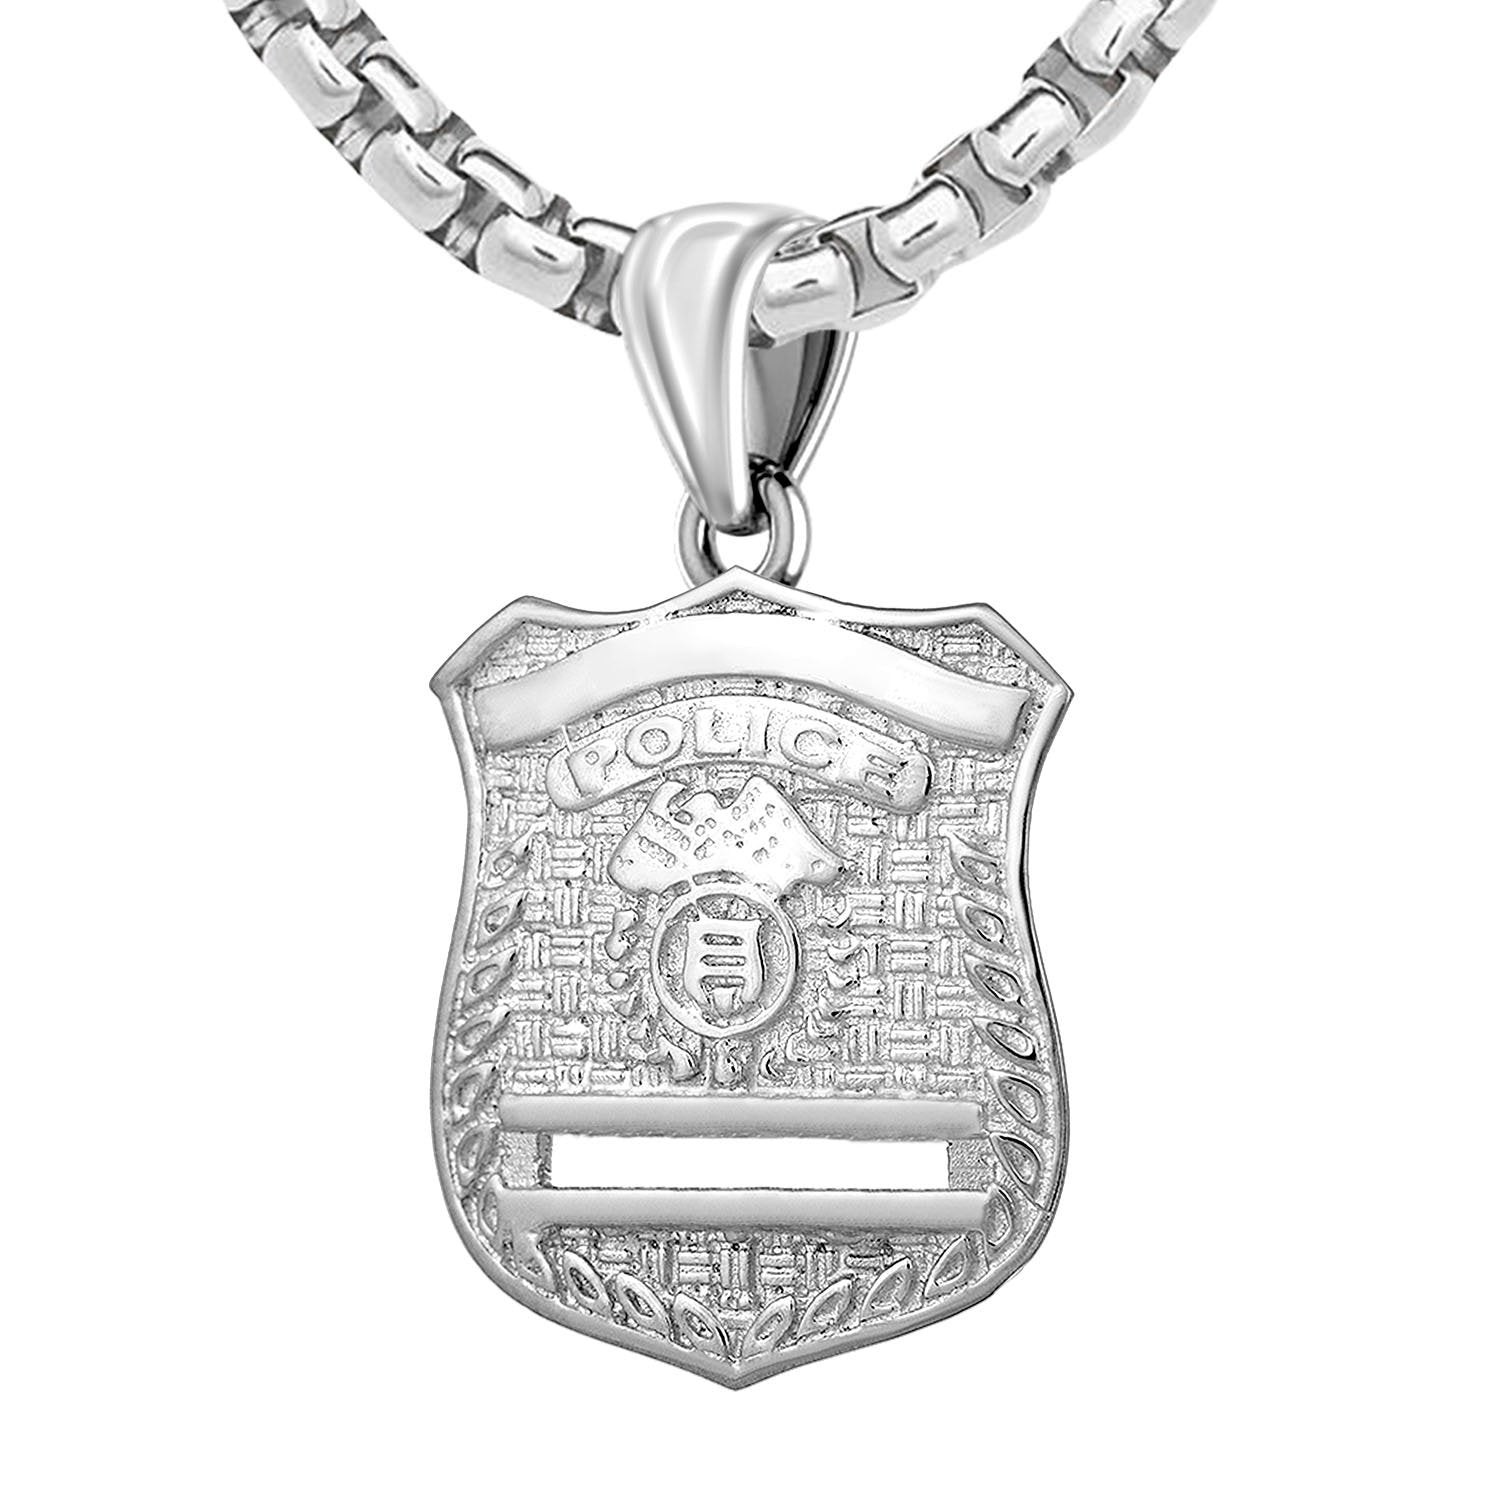 Police Badge Necklace In Silver - 3.7mm Box Chain